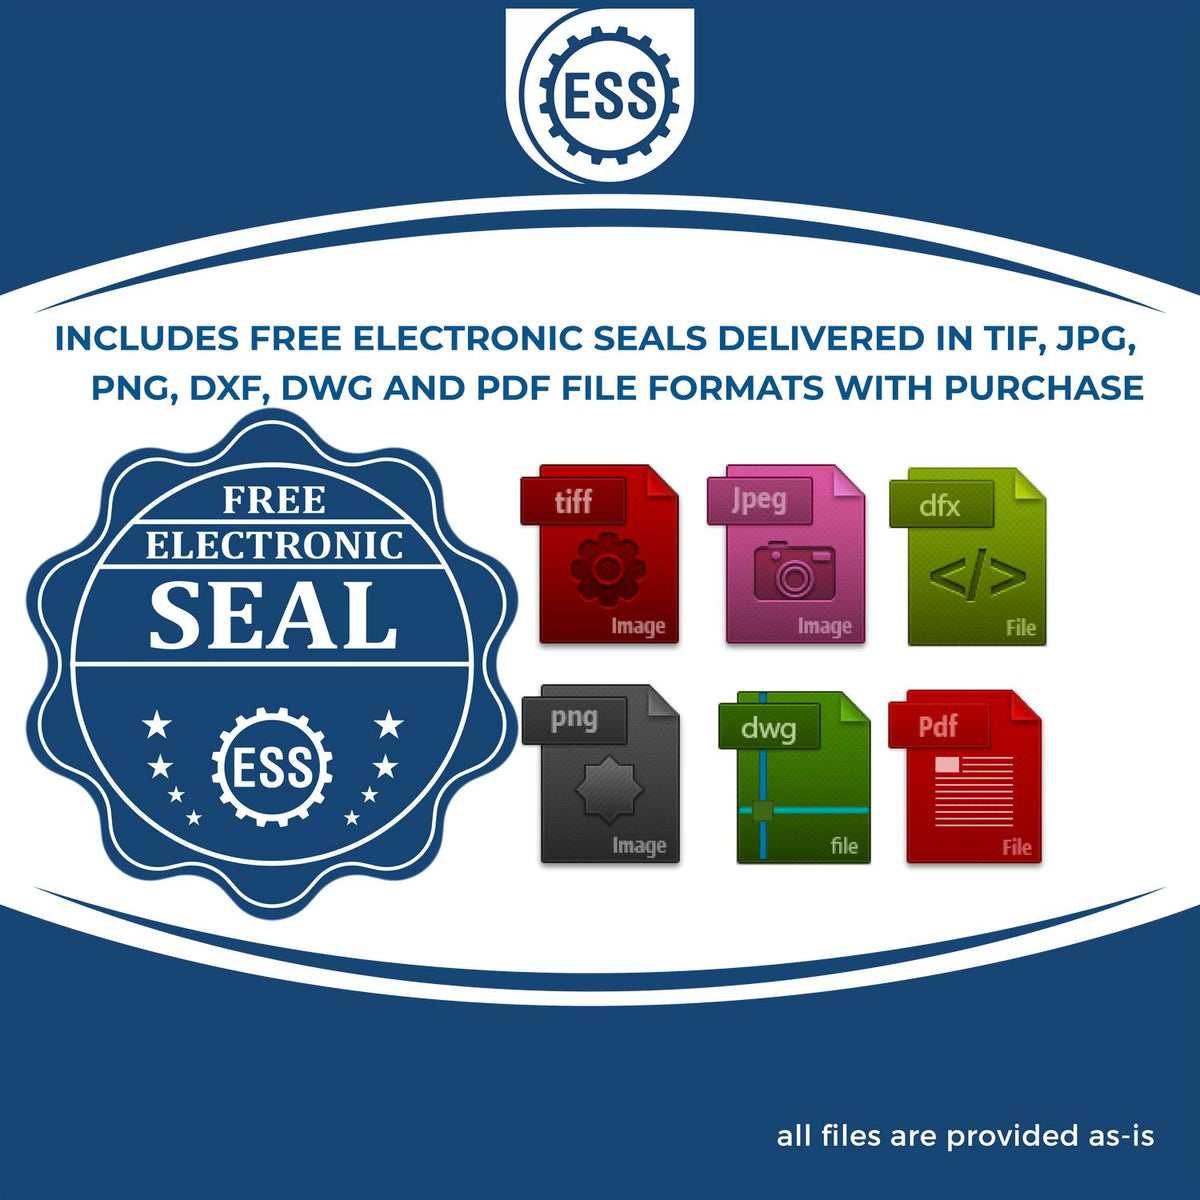 An infographic for the free electronic seal for the Handheld Delaware Architect Seal Embosser illustrating the different file type icons such as DXF, DWG, TIF, JPG and PNG.